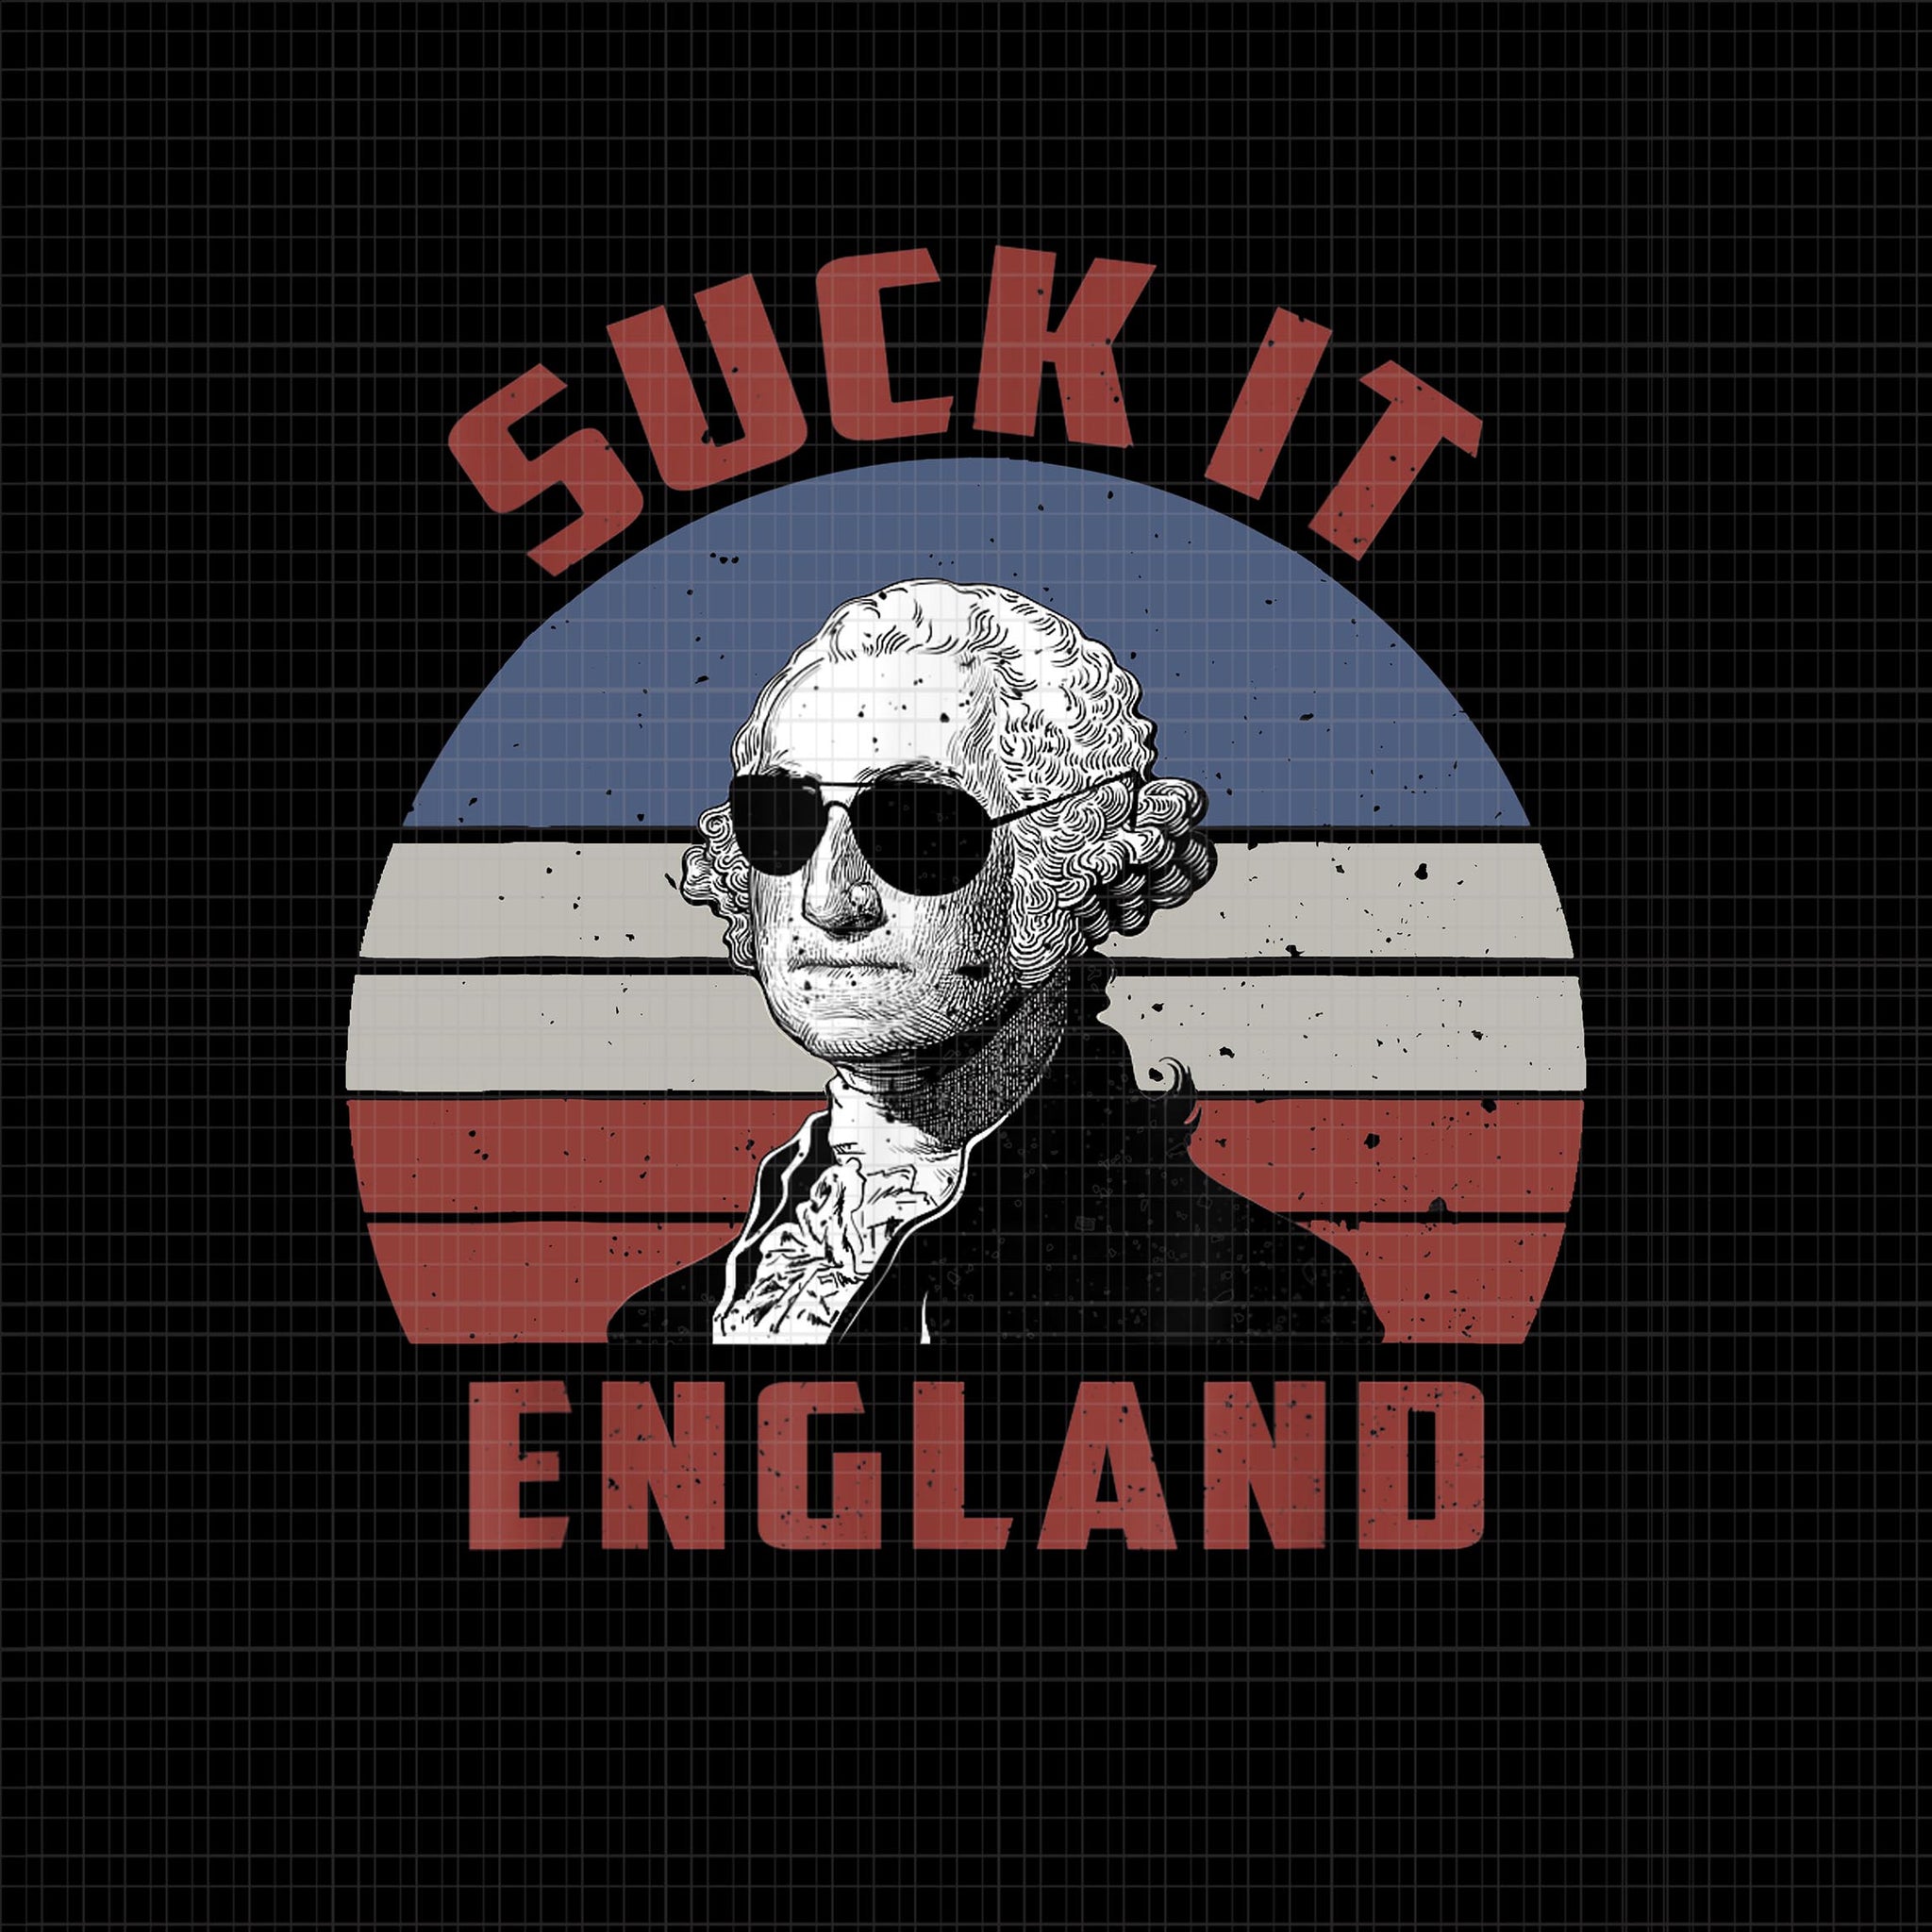 Suck It England PNG, Suck It England 4th of July Humor PNG, 4th of July PNG, 4th of July vector